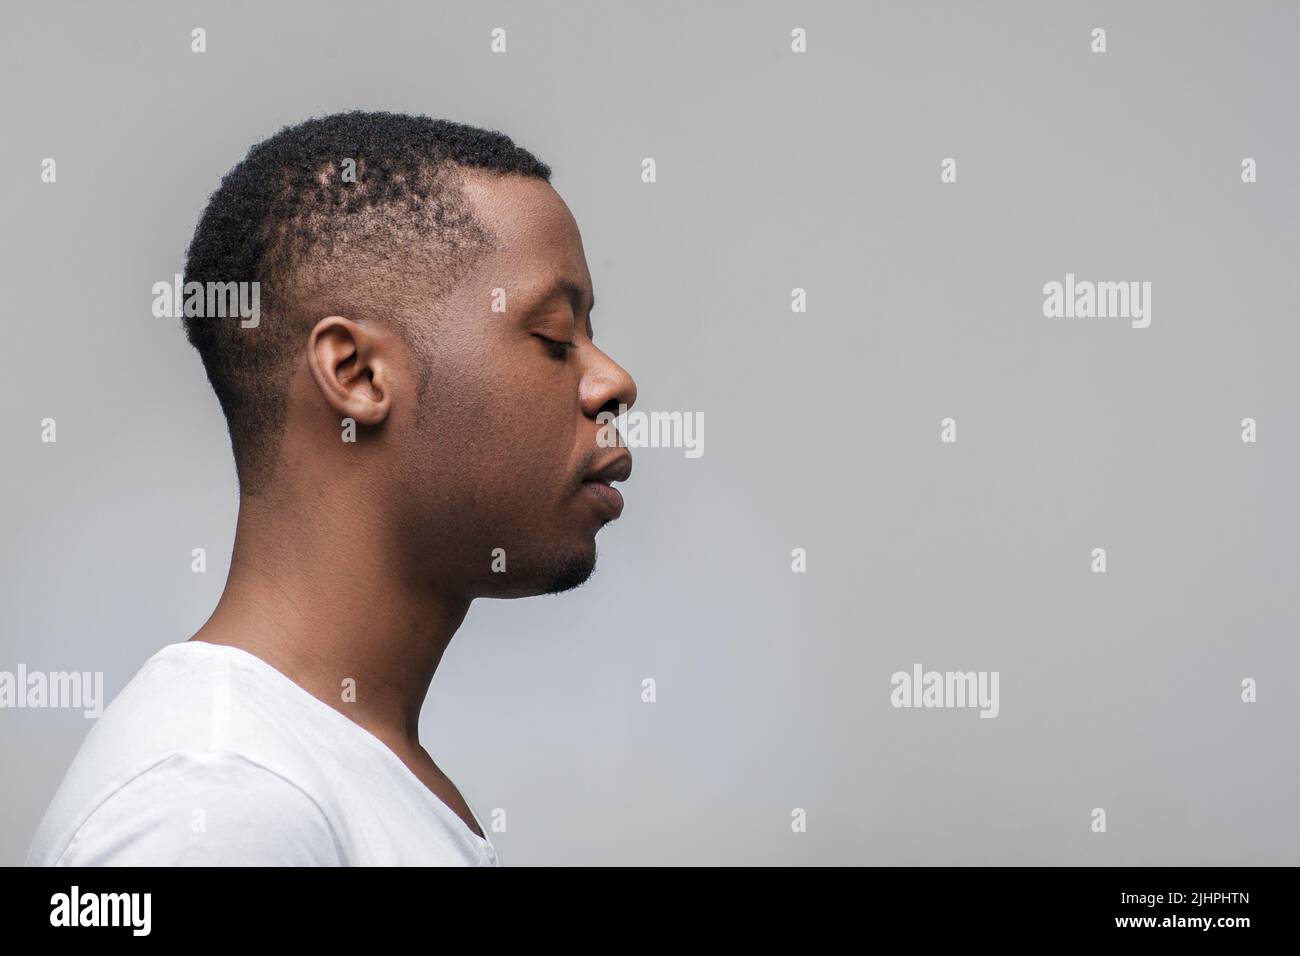 Concentrated black guy looking right. Profile view Stock Photo